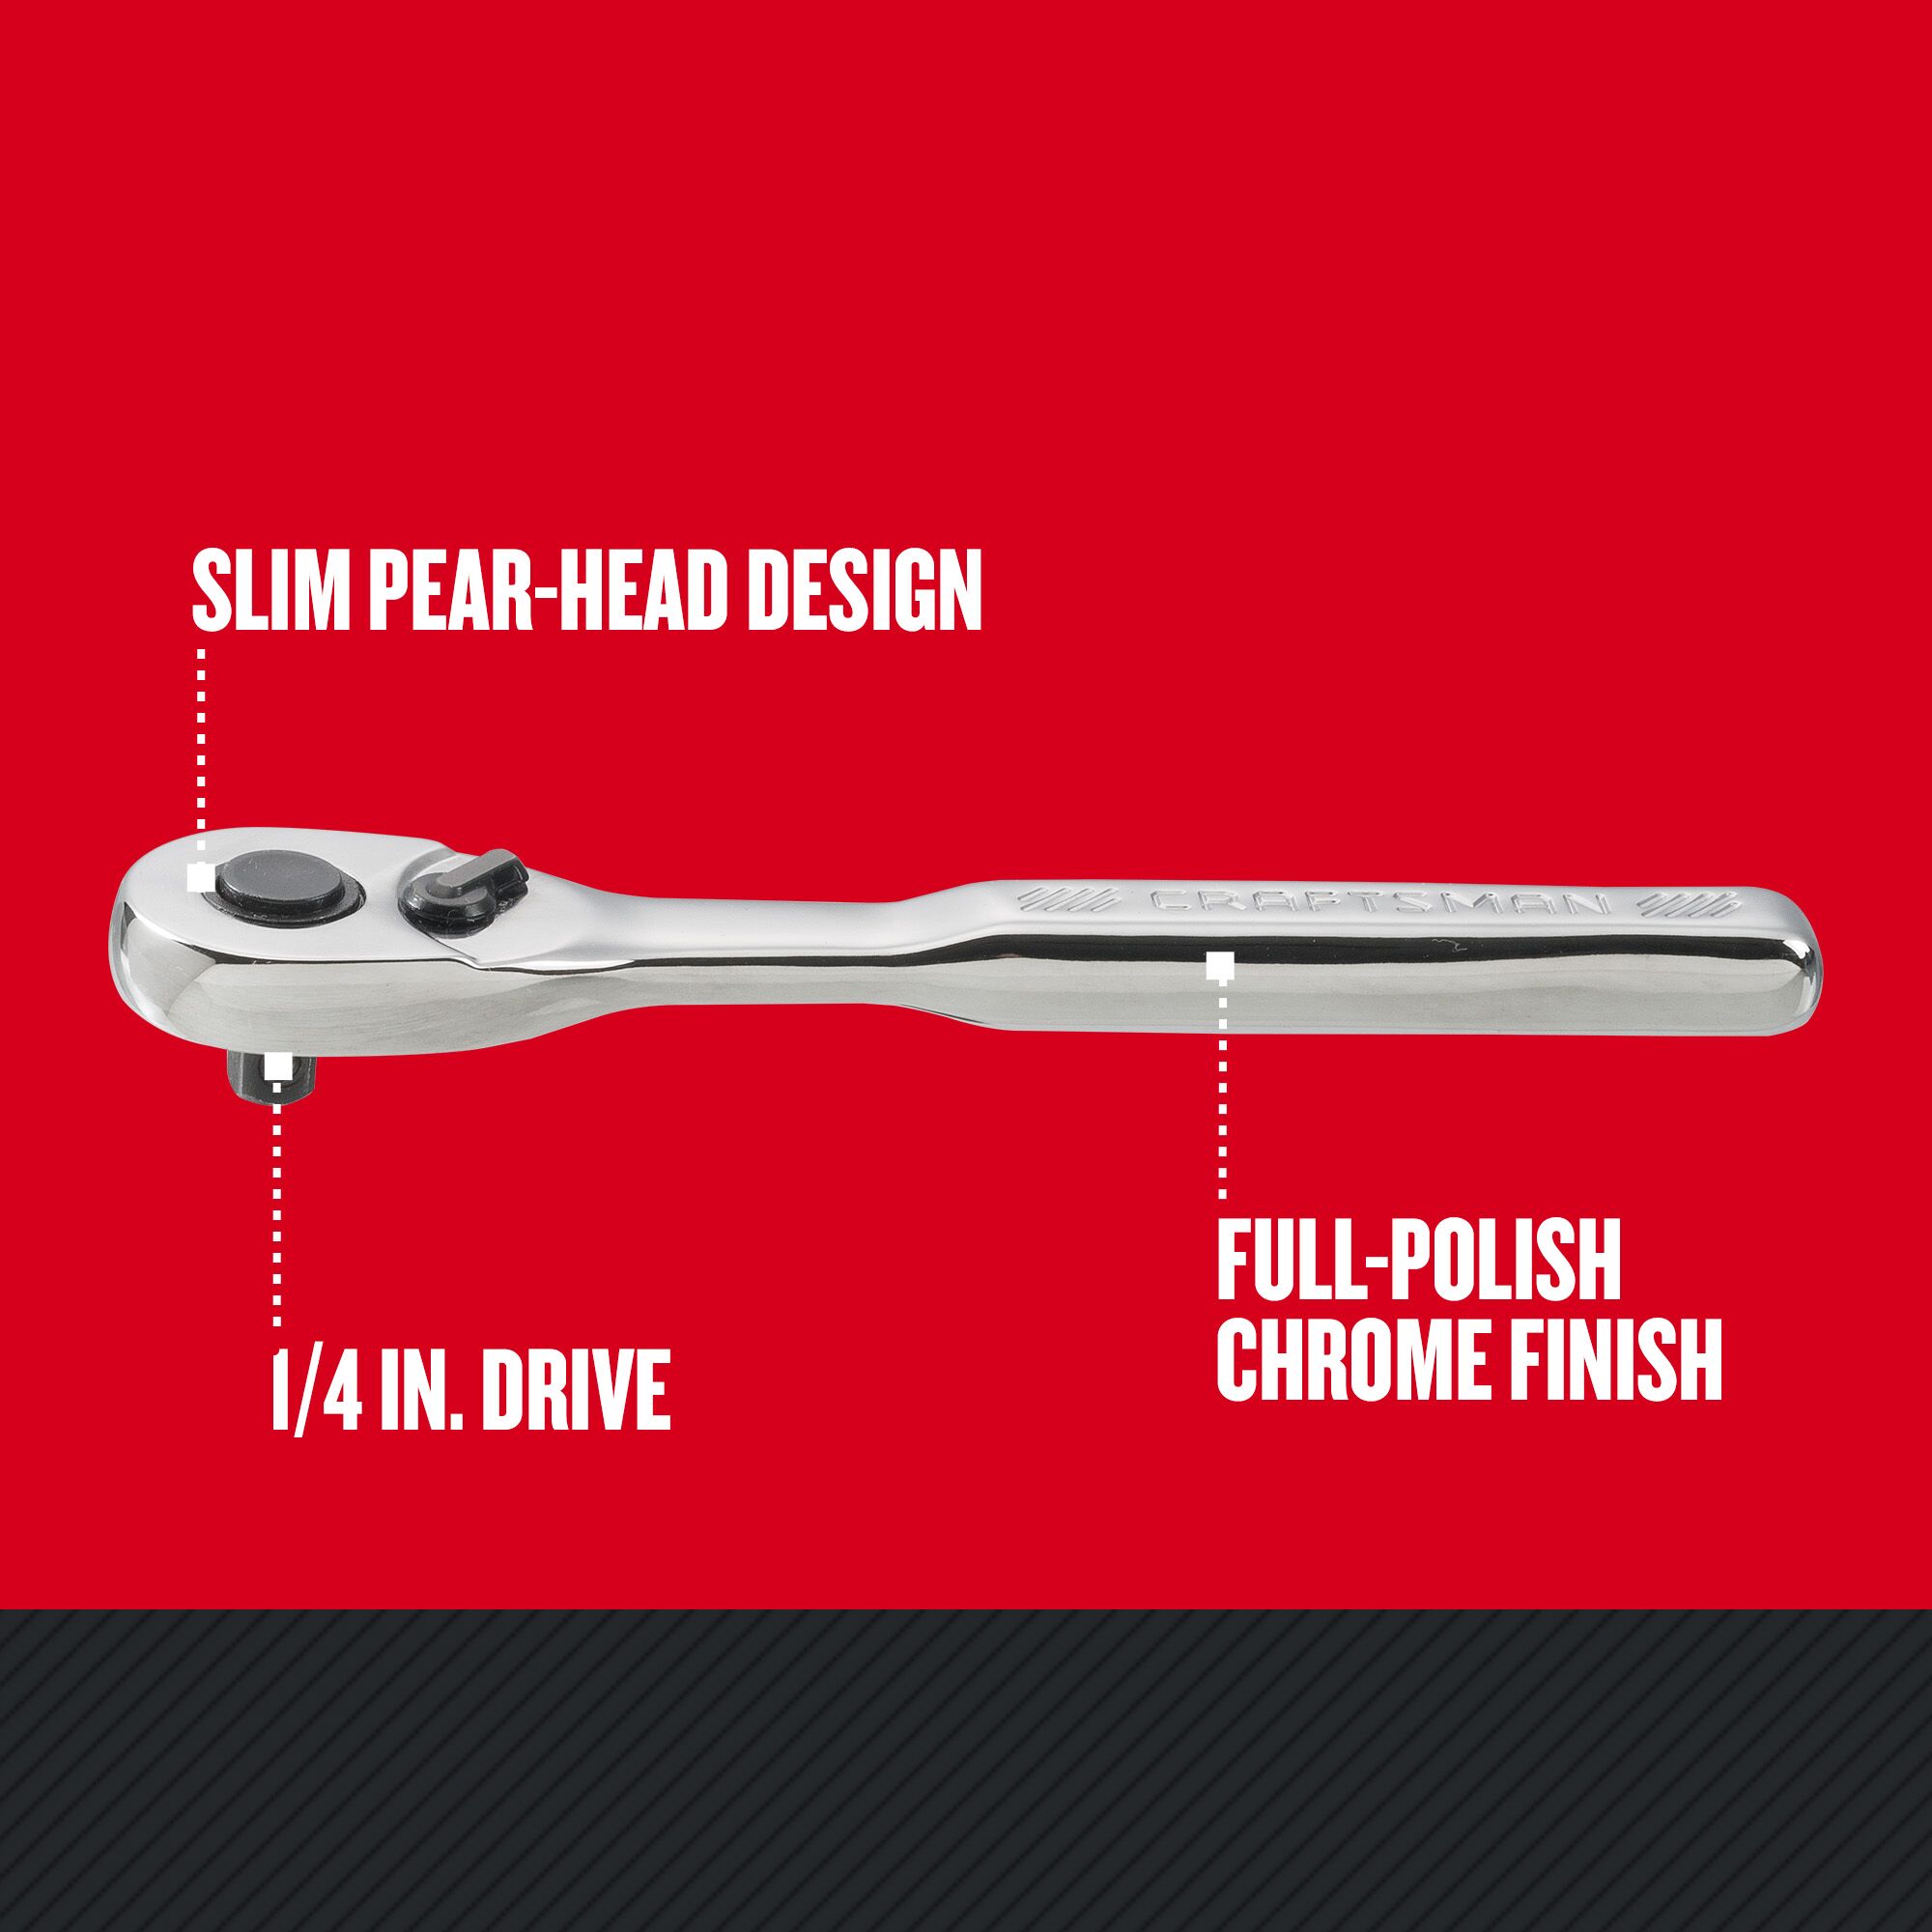 Graphic of CRAFTSMAN Wrenches: Ratchet highlighting product features